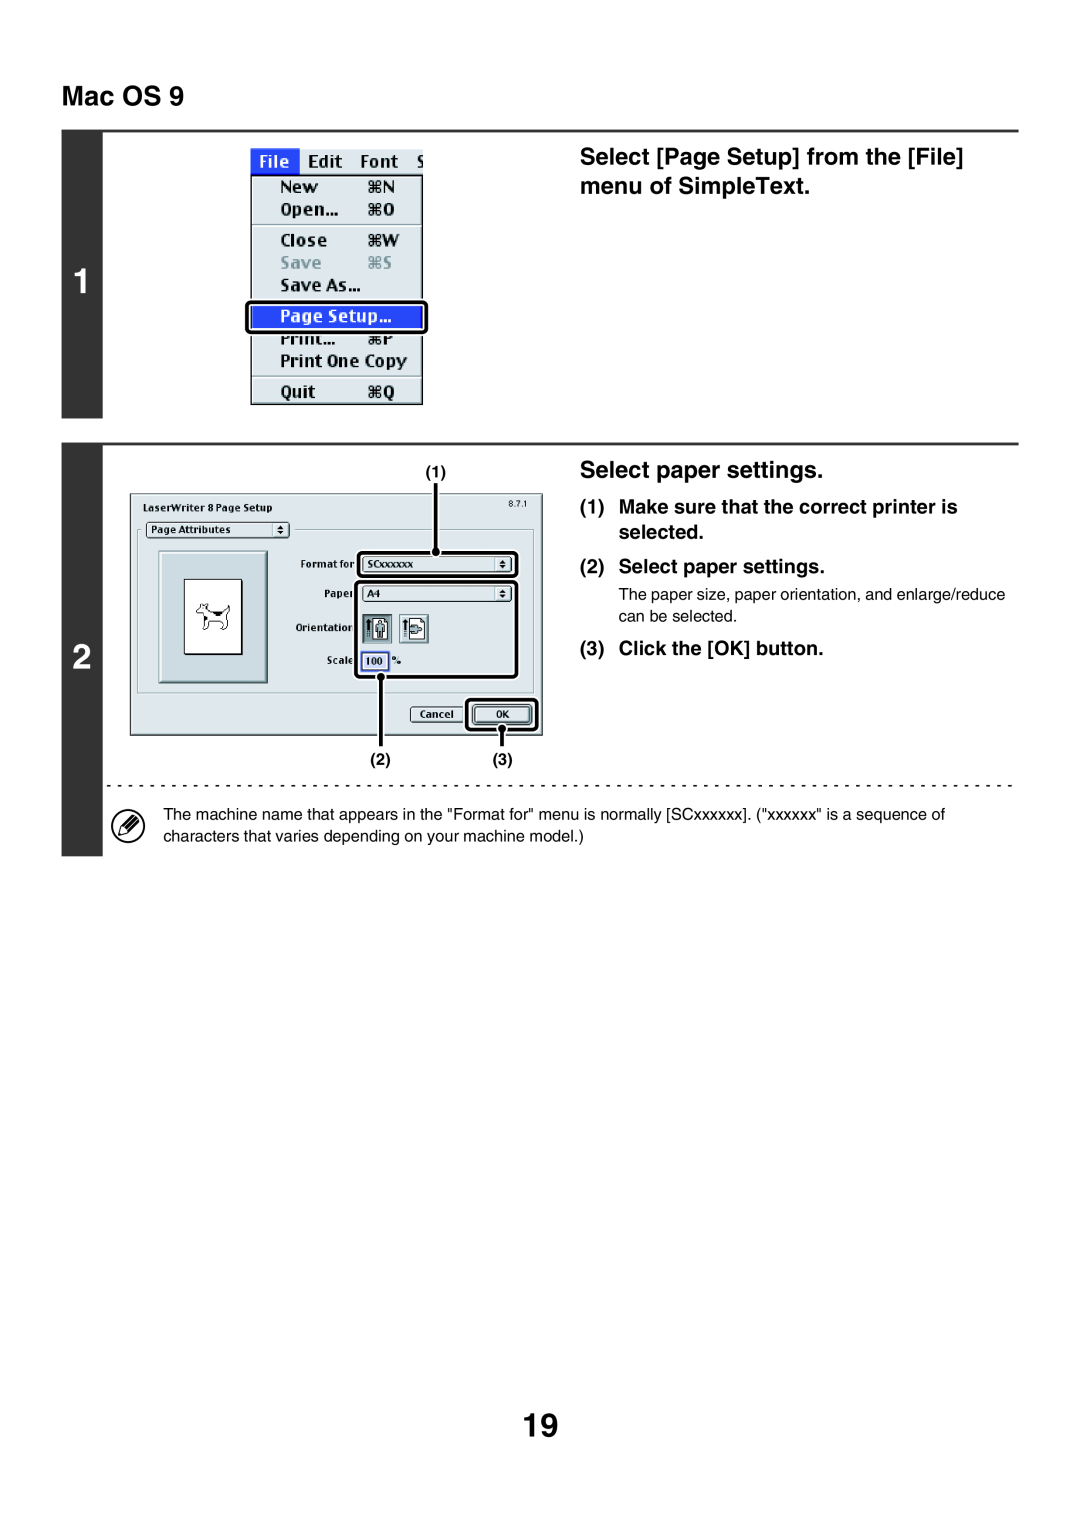 Sharp MX-7000N Select Page Setup from the File menu of SimpleText, Make sure that the correct printer is selected, Mac OS 